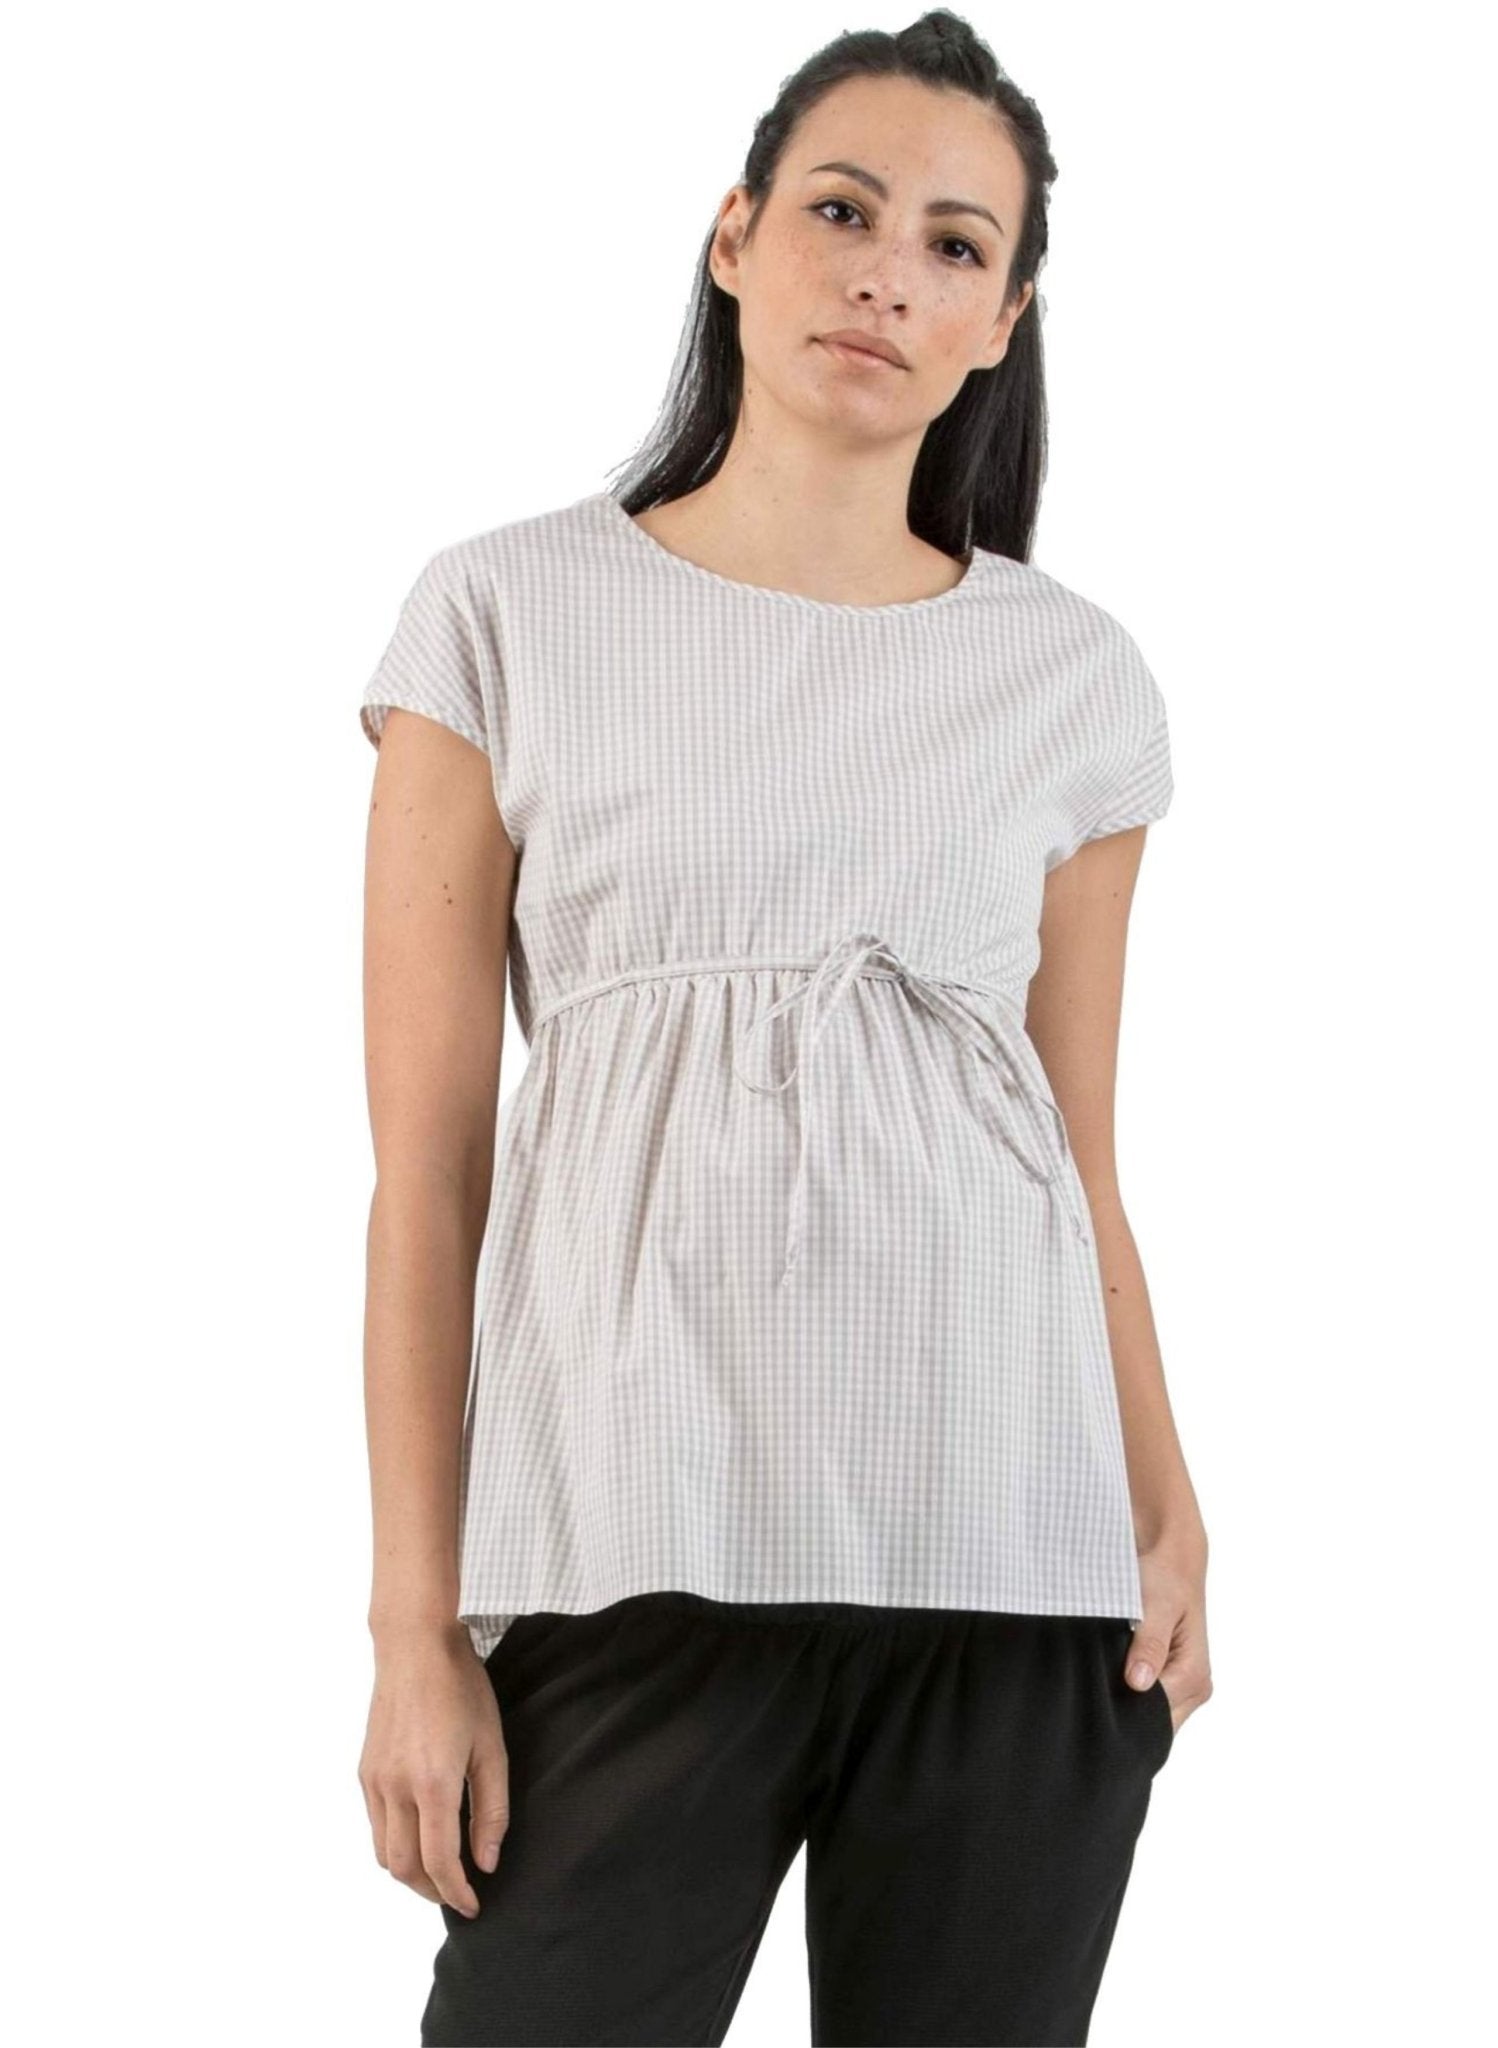 Cotton Maternity Top with Side String - Beige - Mums and Bumps